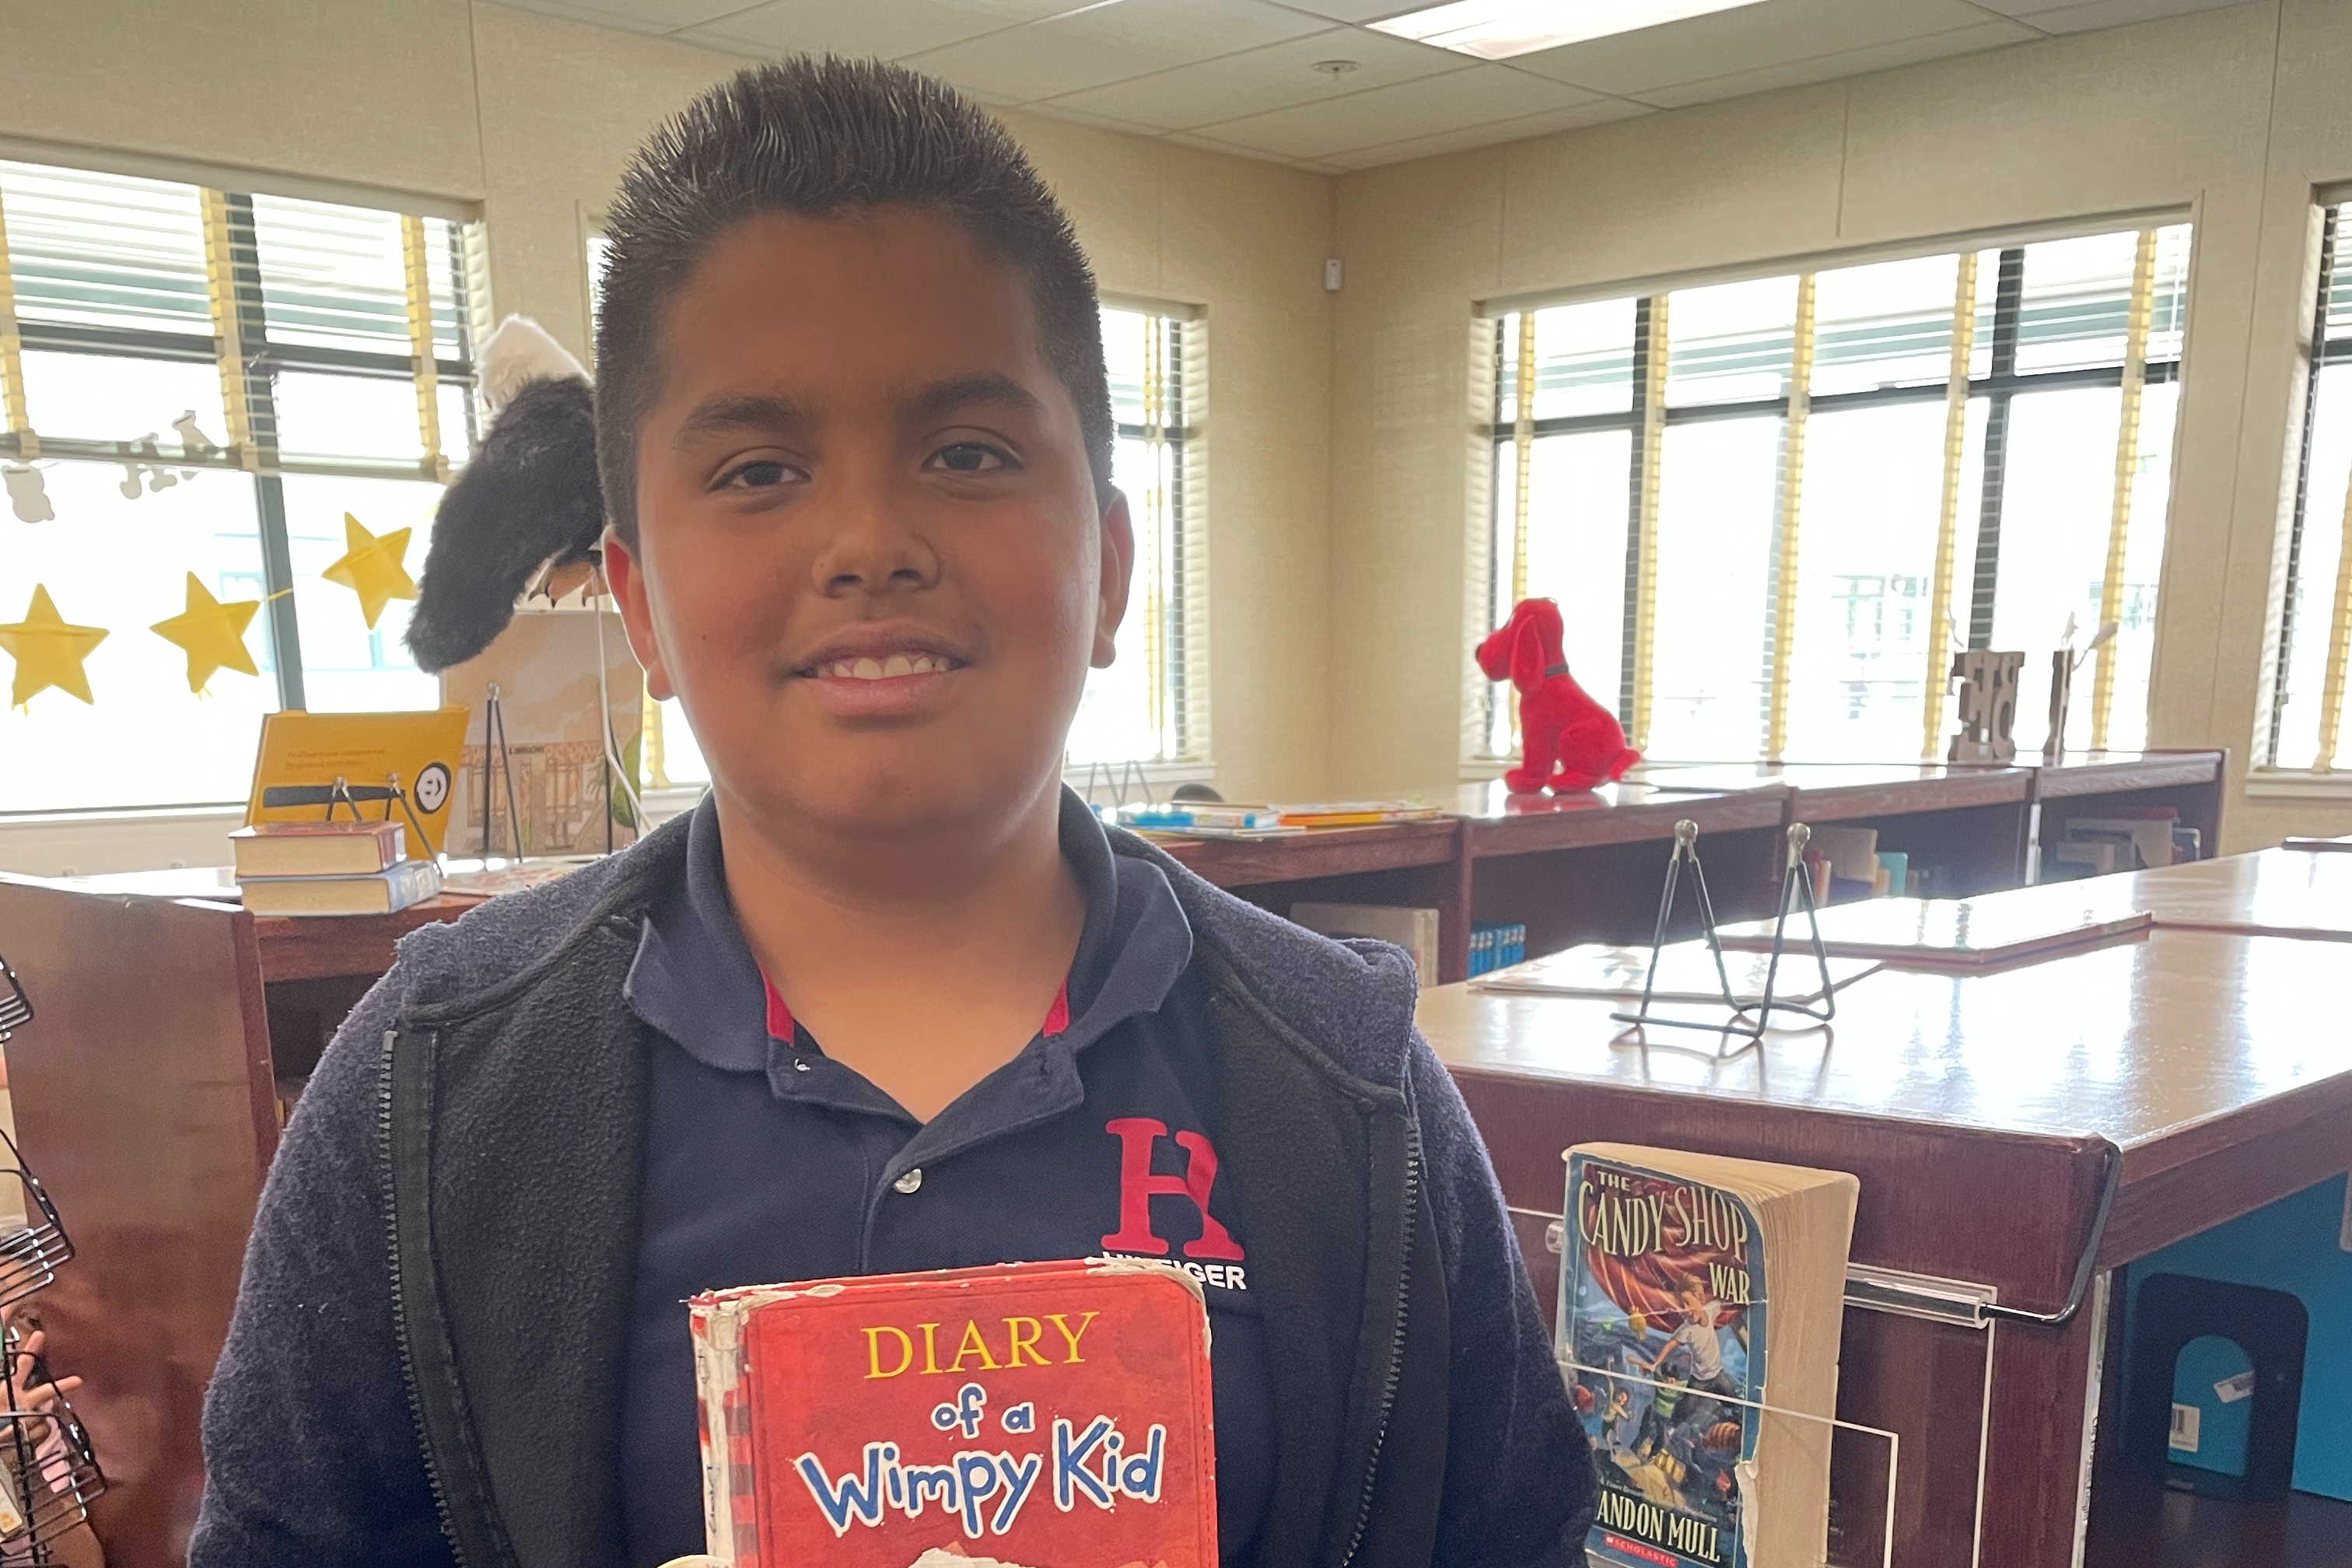 Student finished a book series